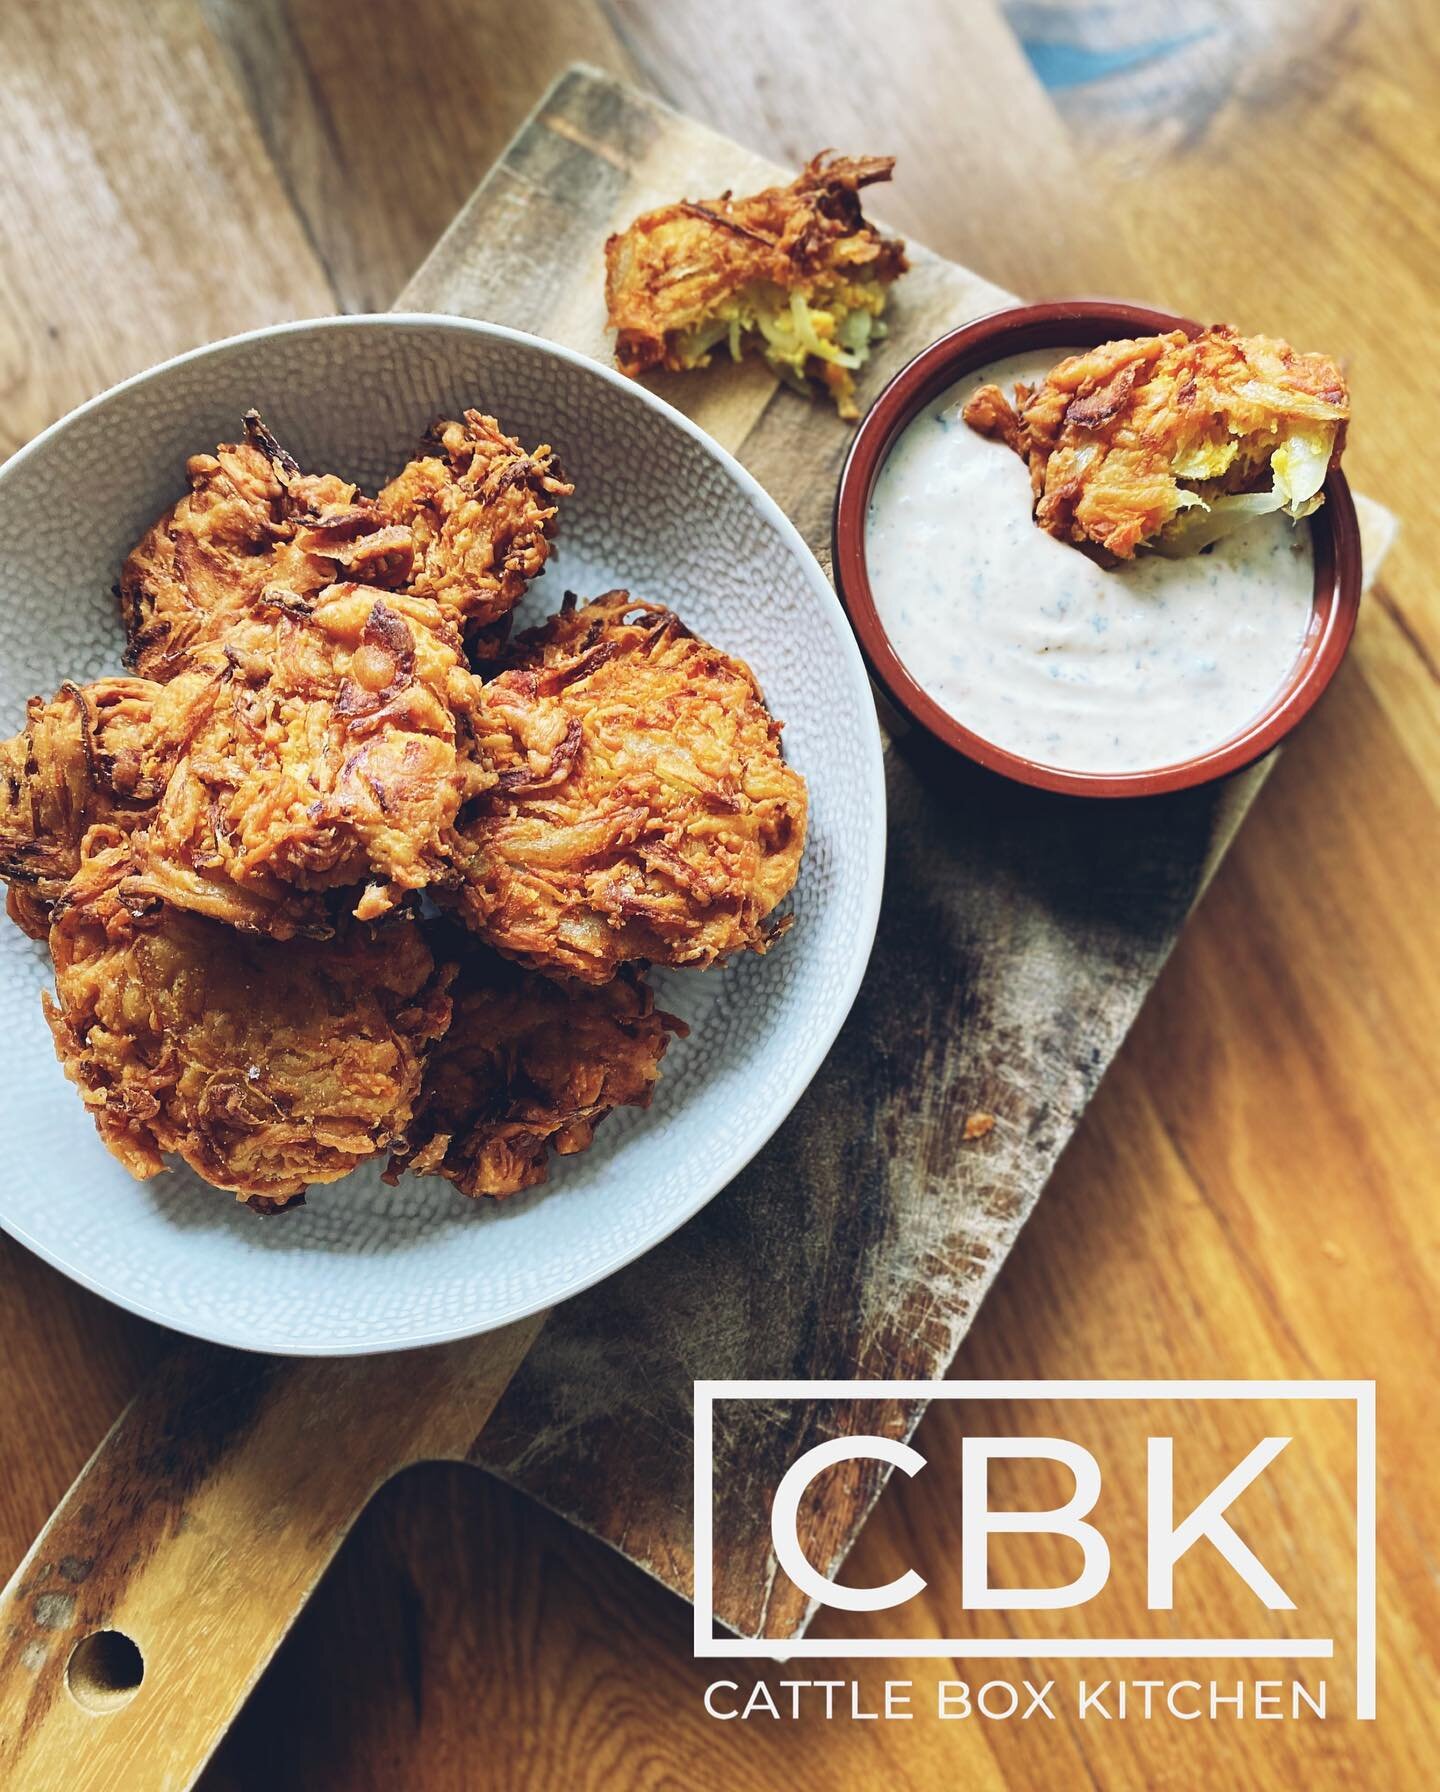 Onion Bhajis 🧡 on the menu this Wednesday 🙌🏽 Indian street food being served up from 5.30pm - Wednesday 19th July, see you there ✌🏾 
.
#streetfood #cbk #cattleboxkitchen #foodtruck #foodvan #indian #onionbhaji #bhaji #side #eatlocal #smallbusines